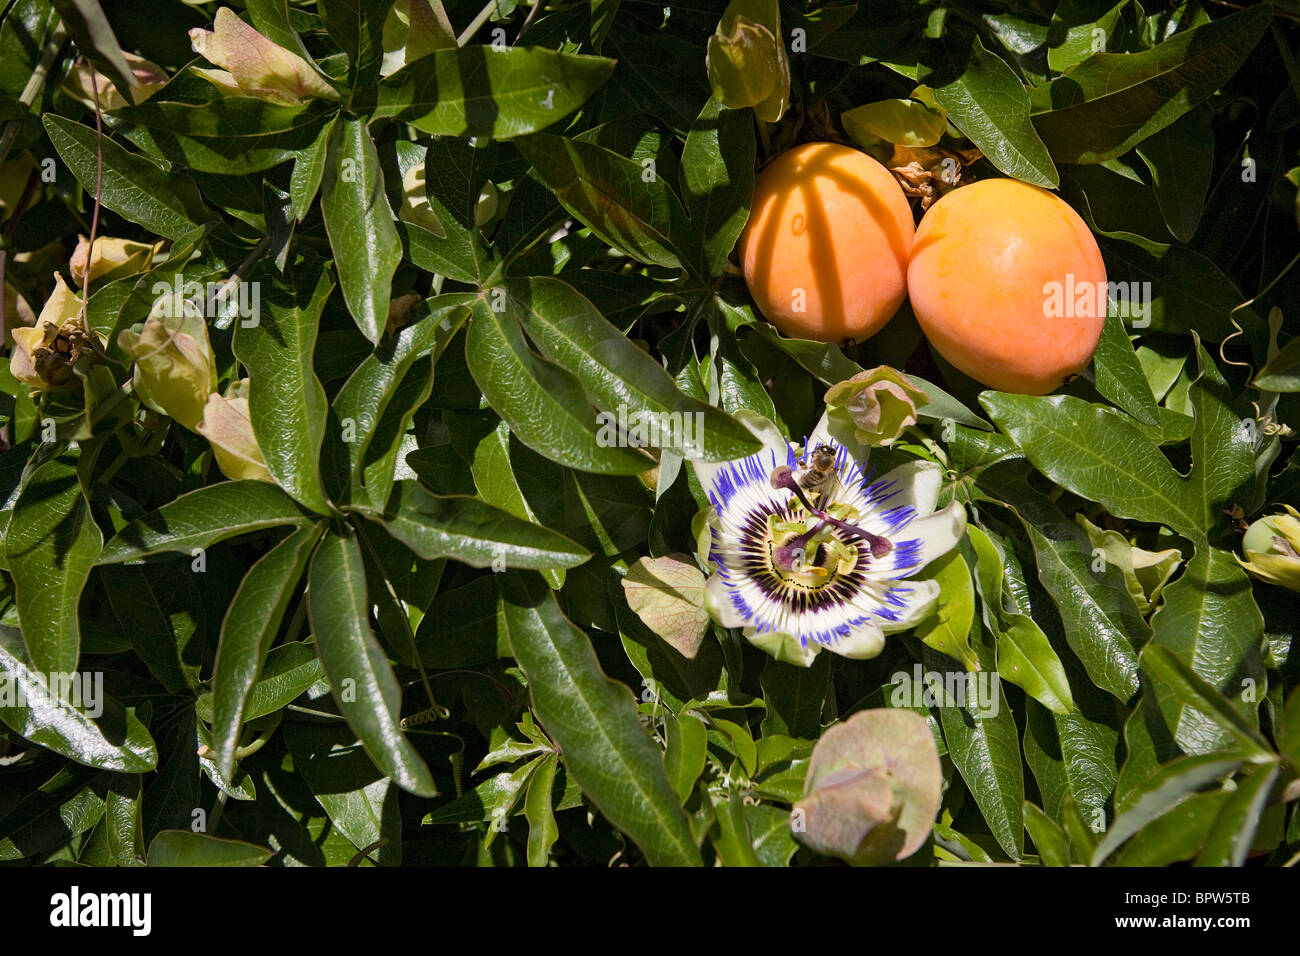 Passion flower with flower and fruits (Passiflora caerulea). Stock Photo